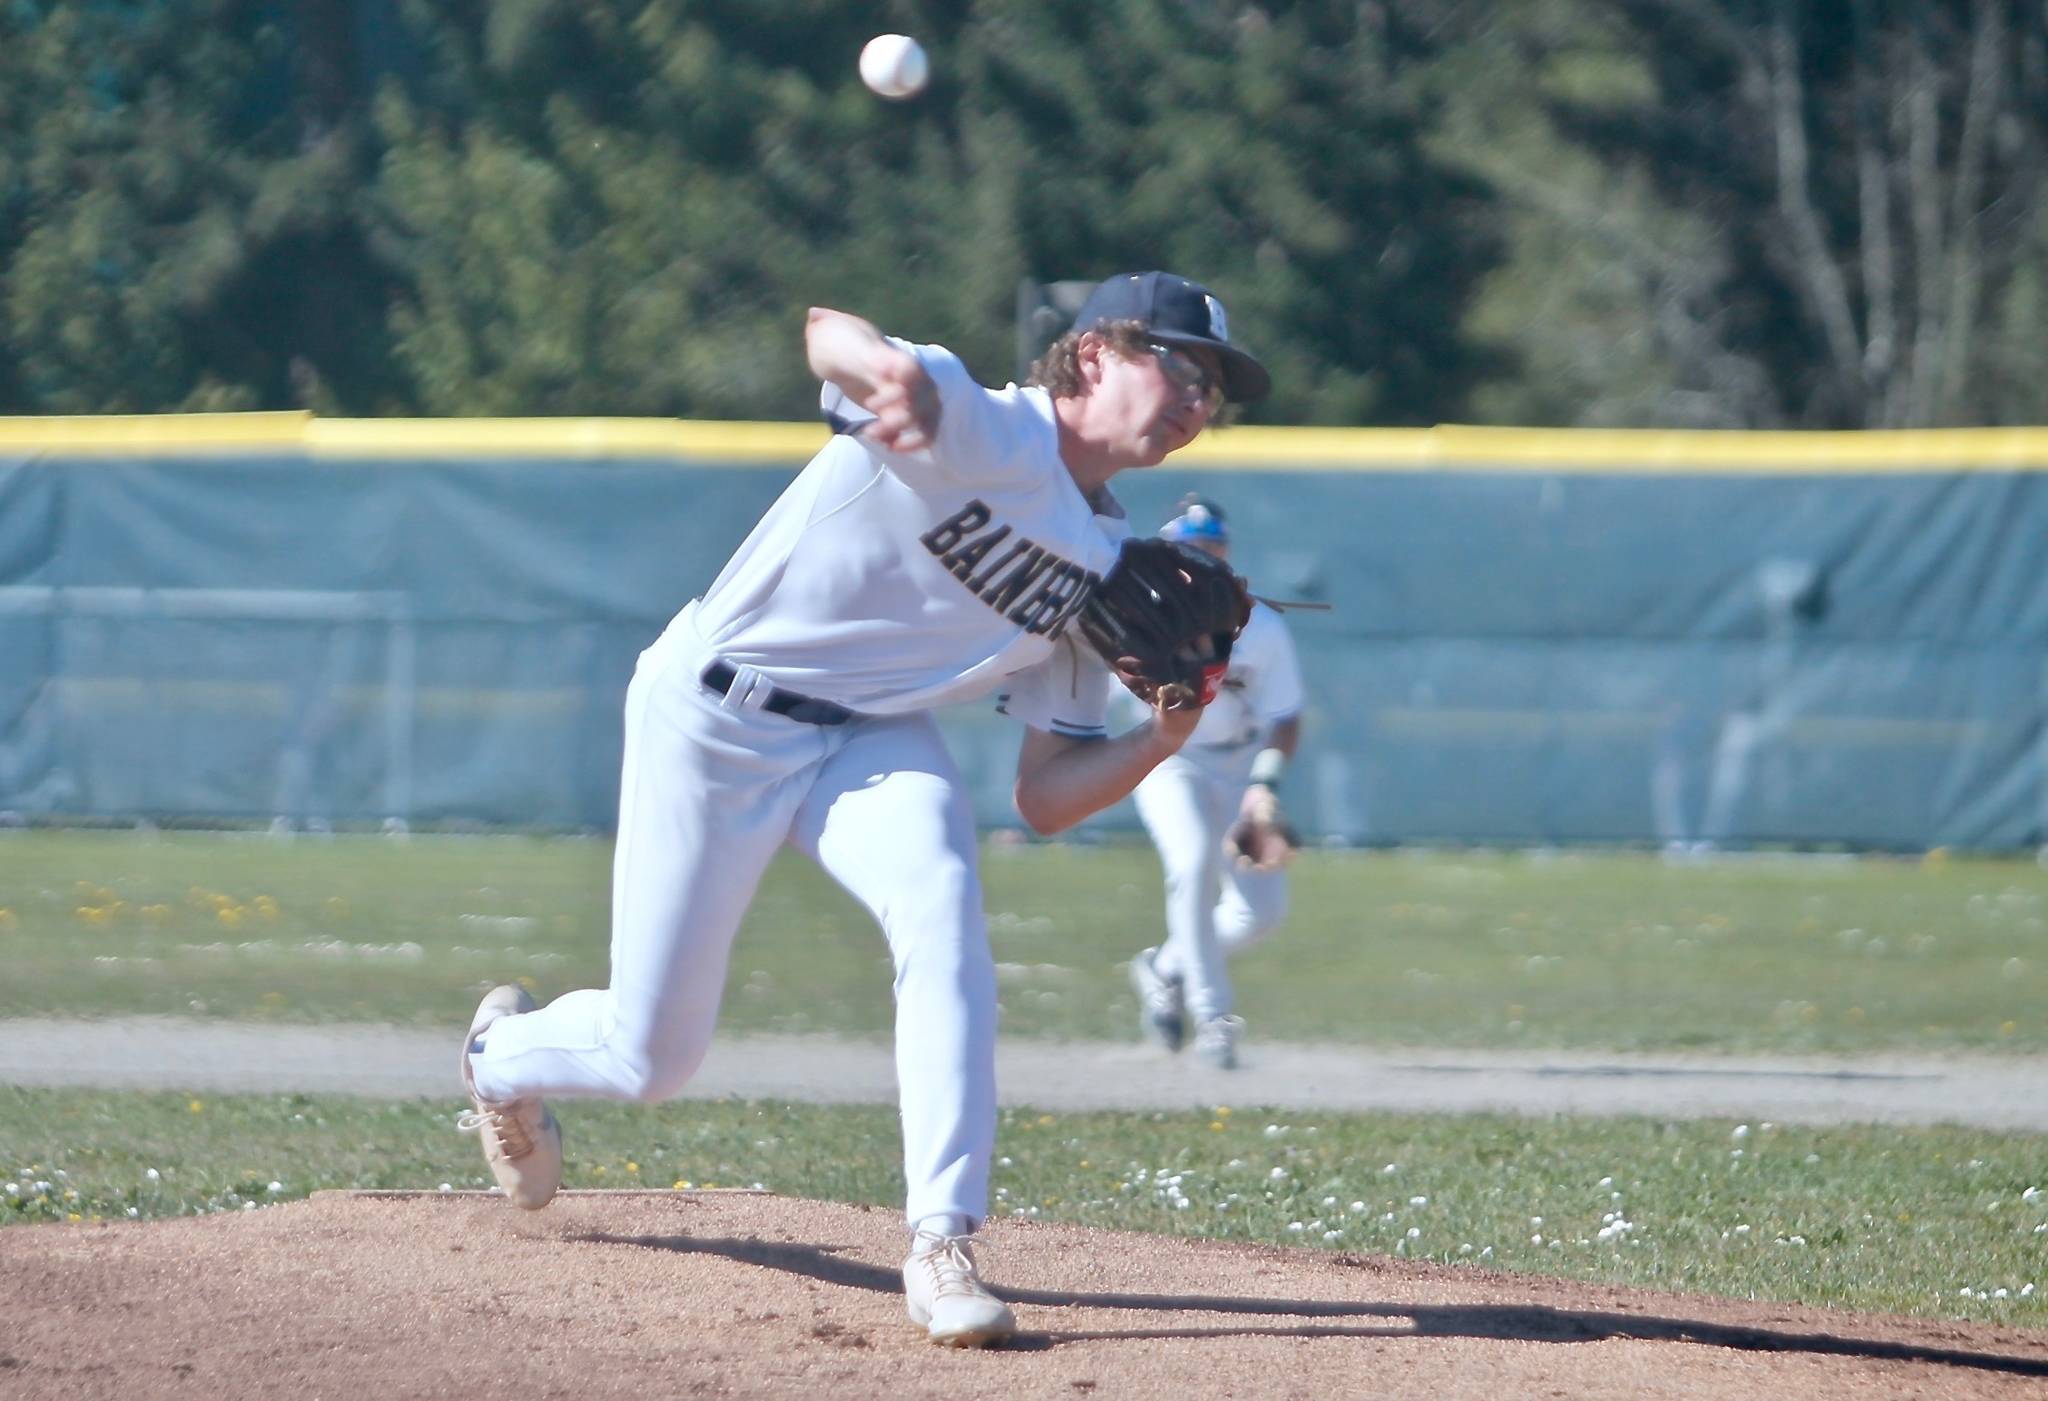 JR Ritchie threw five shutout innings for Bainbridge and also had two singles and a walk in four plate appearances against North Kitsap on Wednesday. (Mark Krulish/Kitsap News Group)